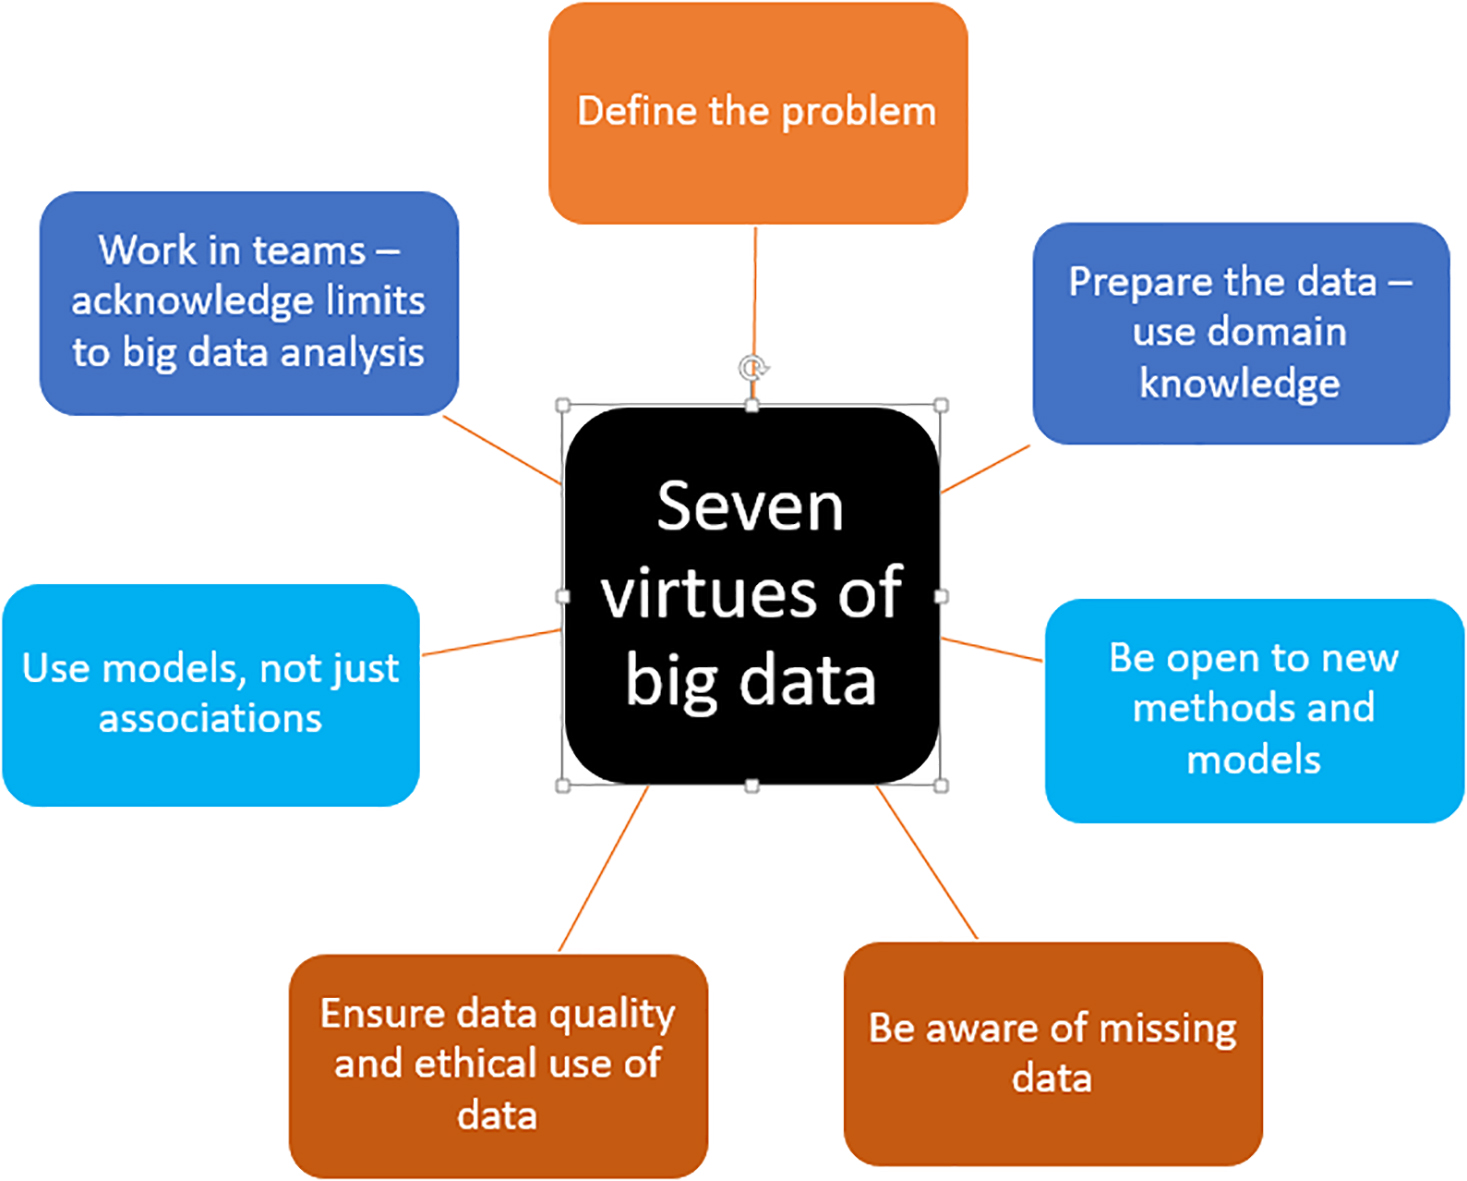 The 7 virtues for big data [21].